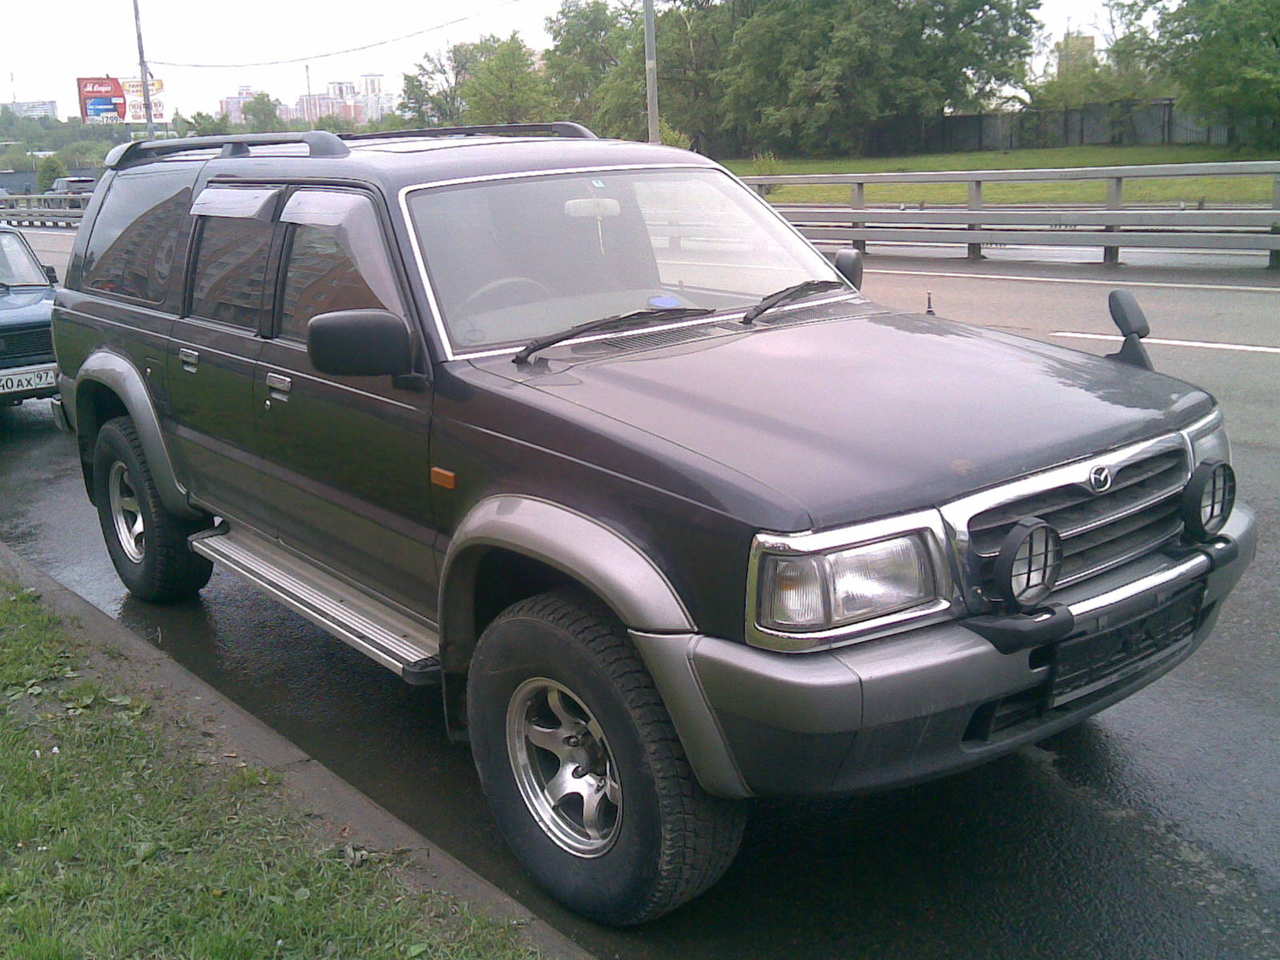 Mazda marvie. Mazda proceed Marvie. Мазда Марви 1996. Mazda proceed Marvie 1990. Мазда Просид Марви 1998г.